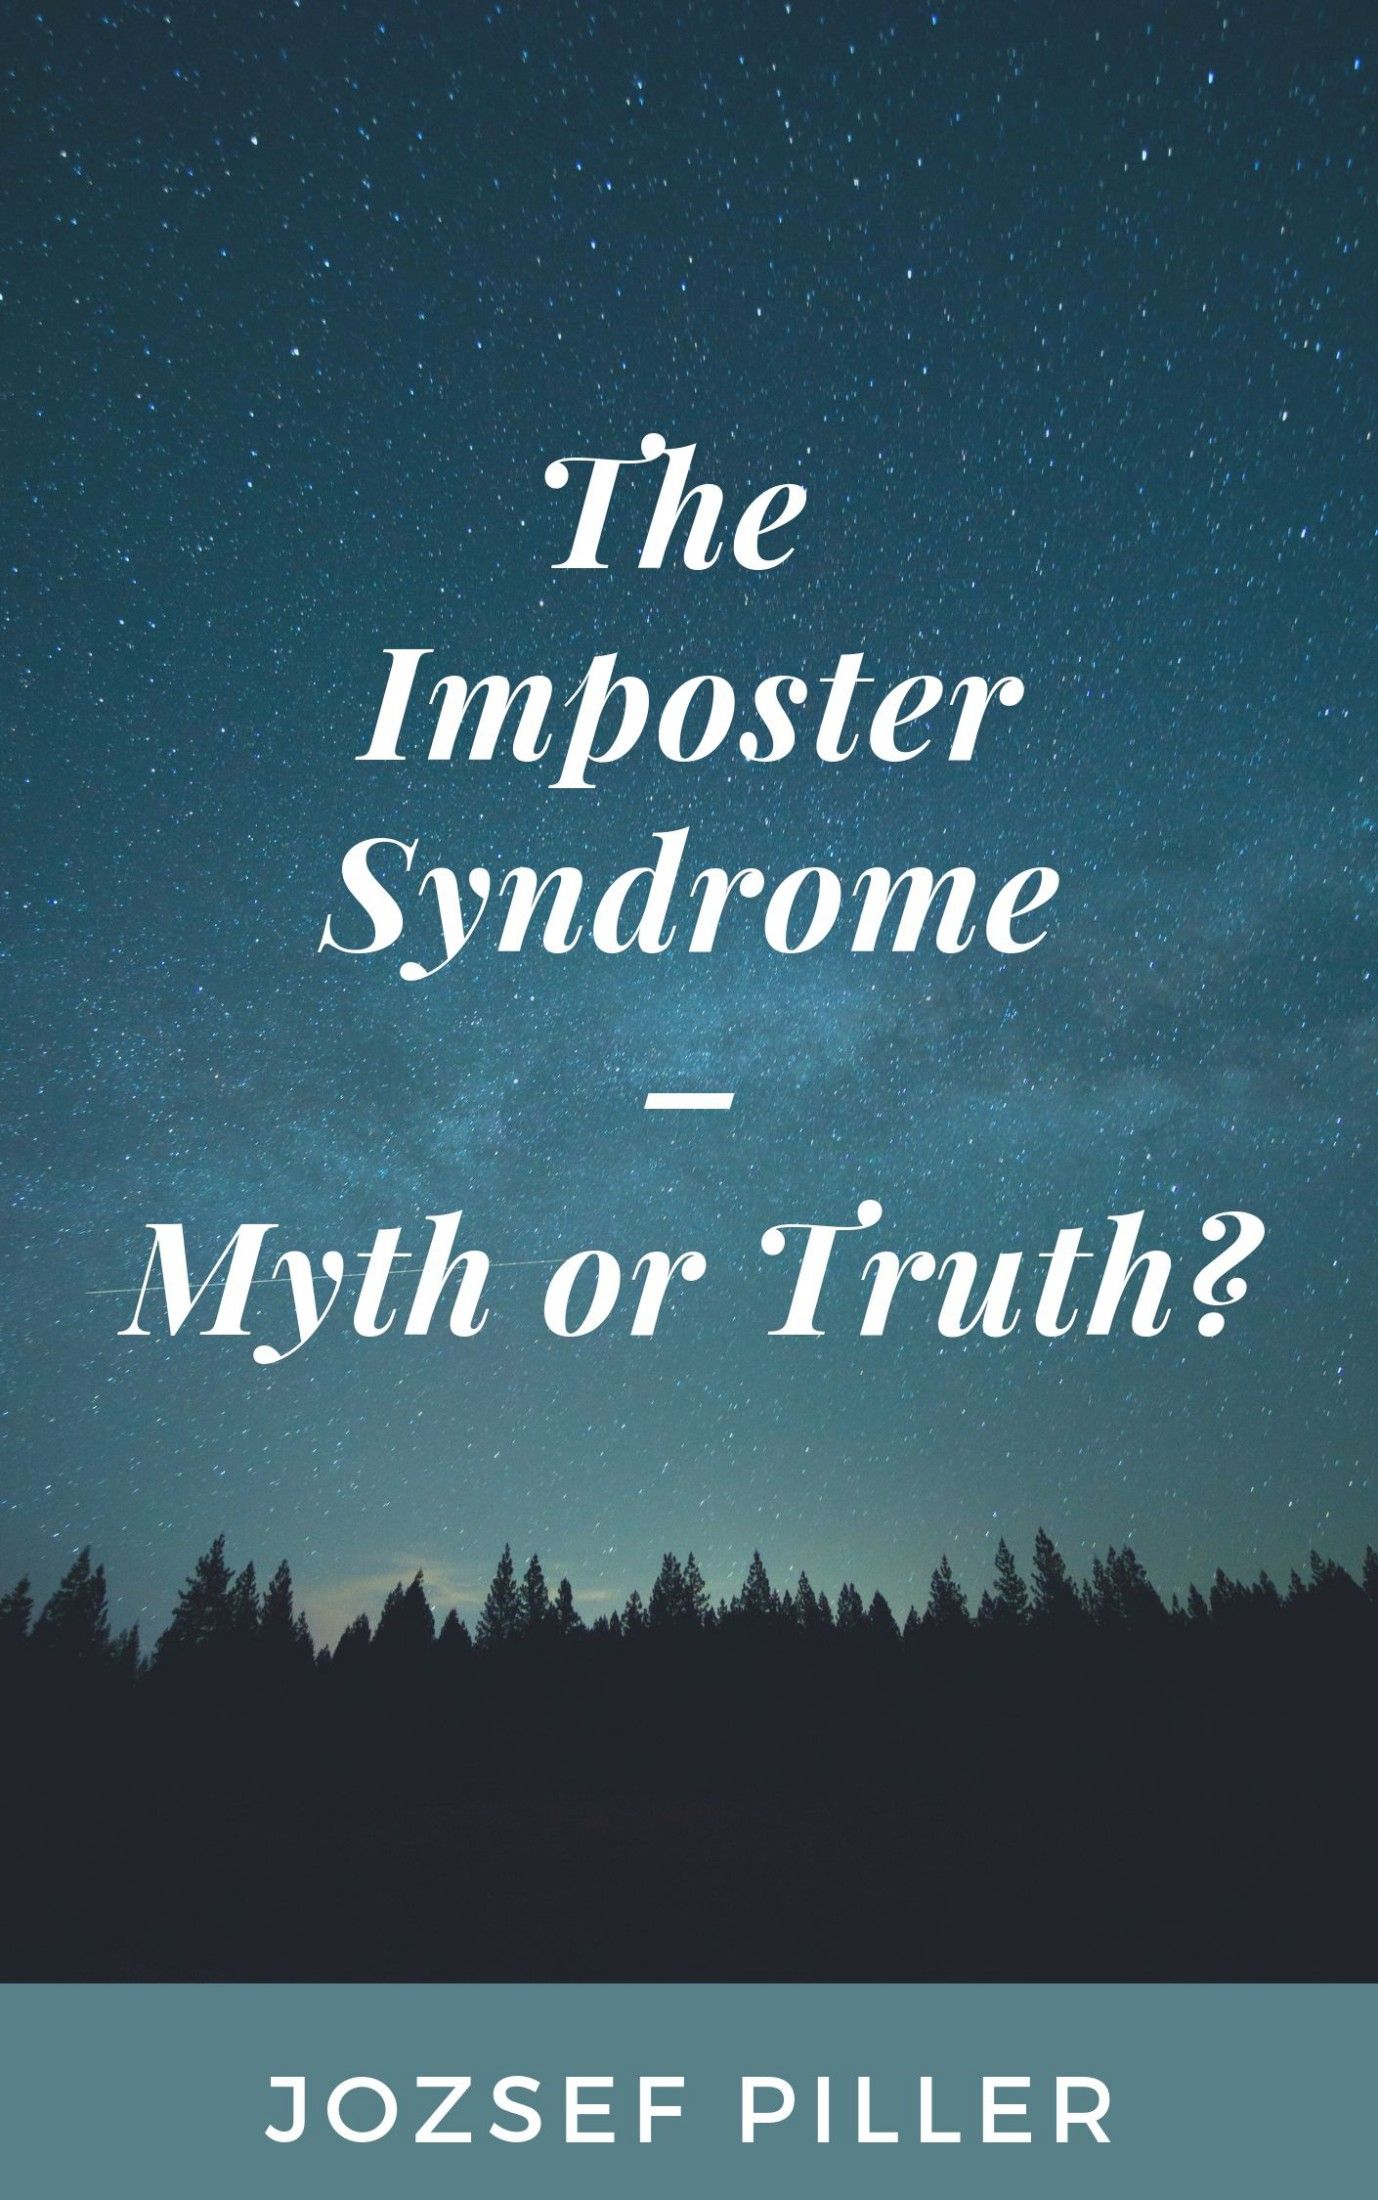 The Imposter Syndrome – Myth or Truth?, eBook by Jozsef Piller